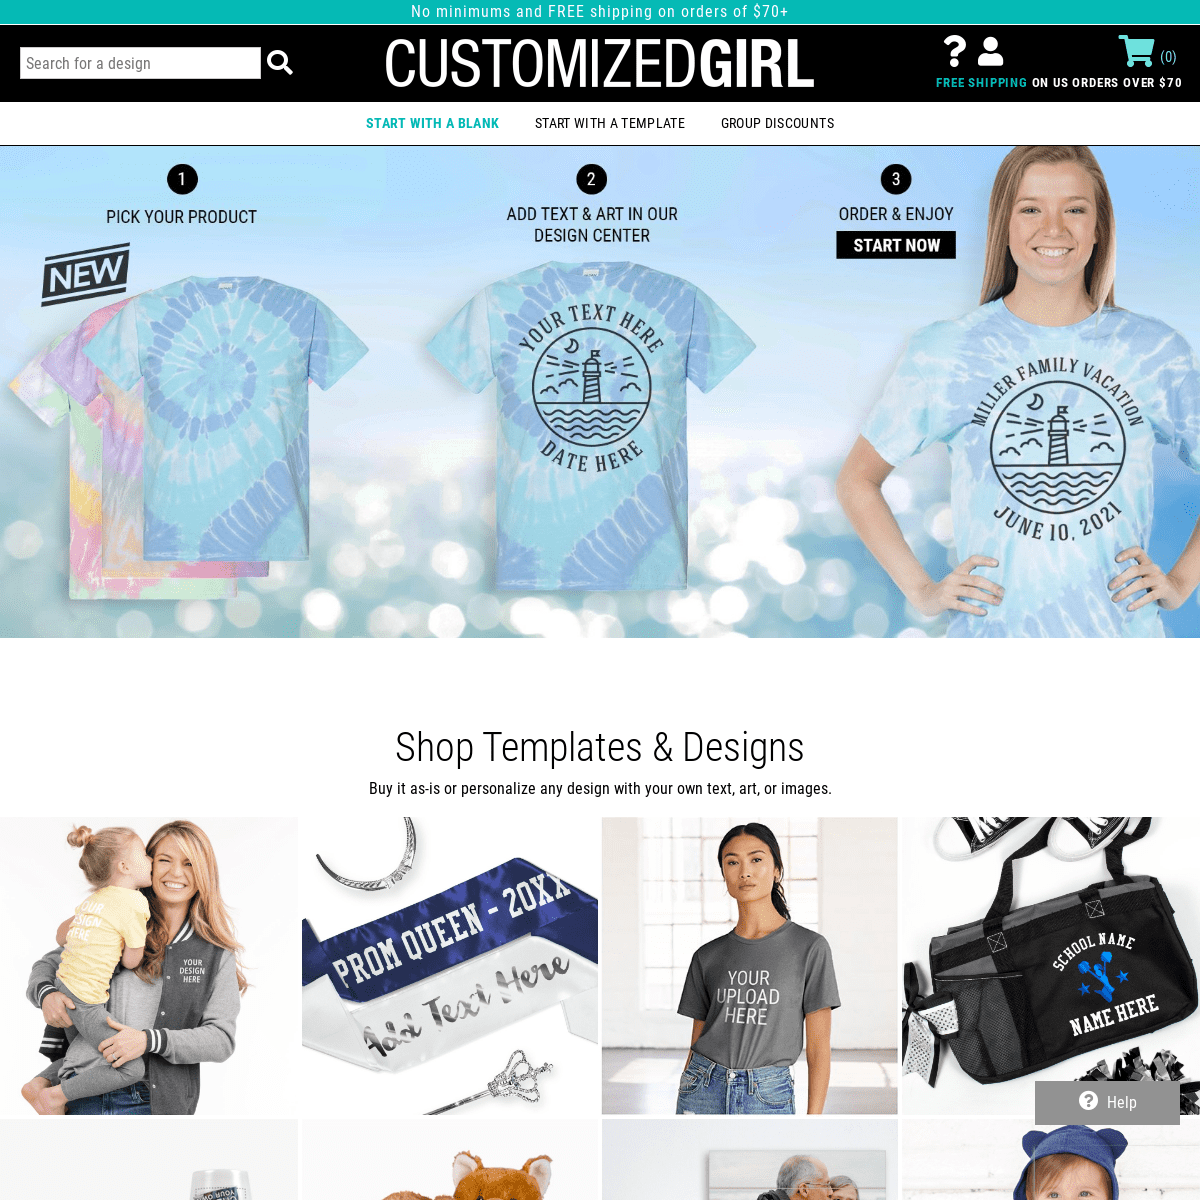 A complete backup of https://customizedgirl.com